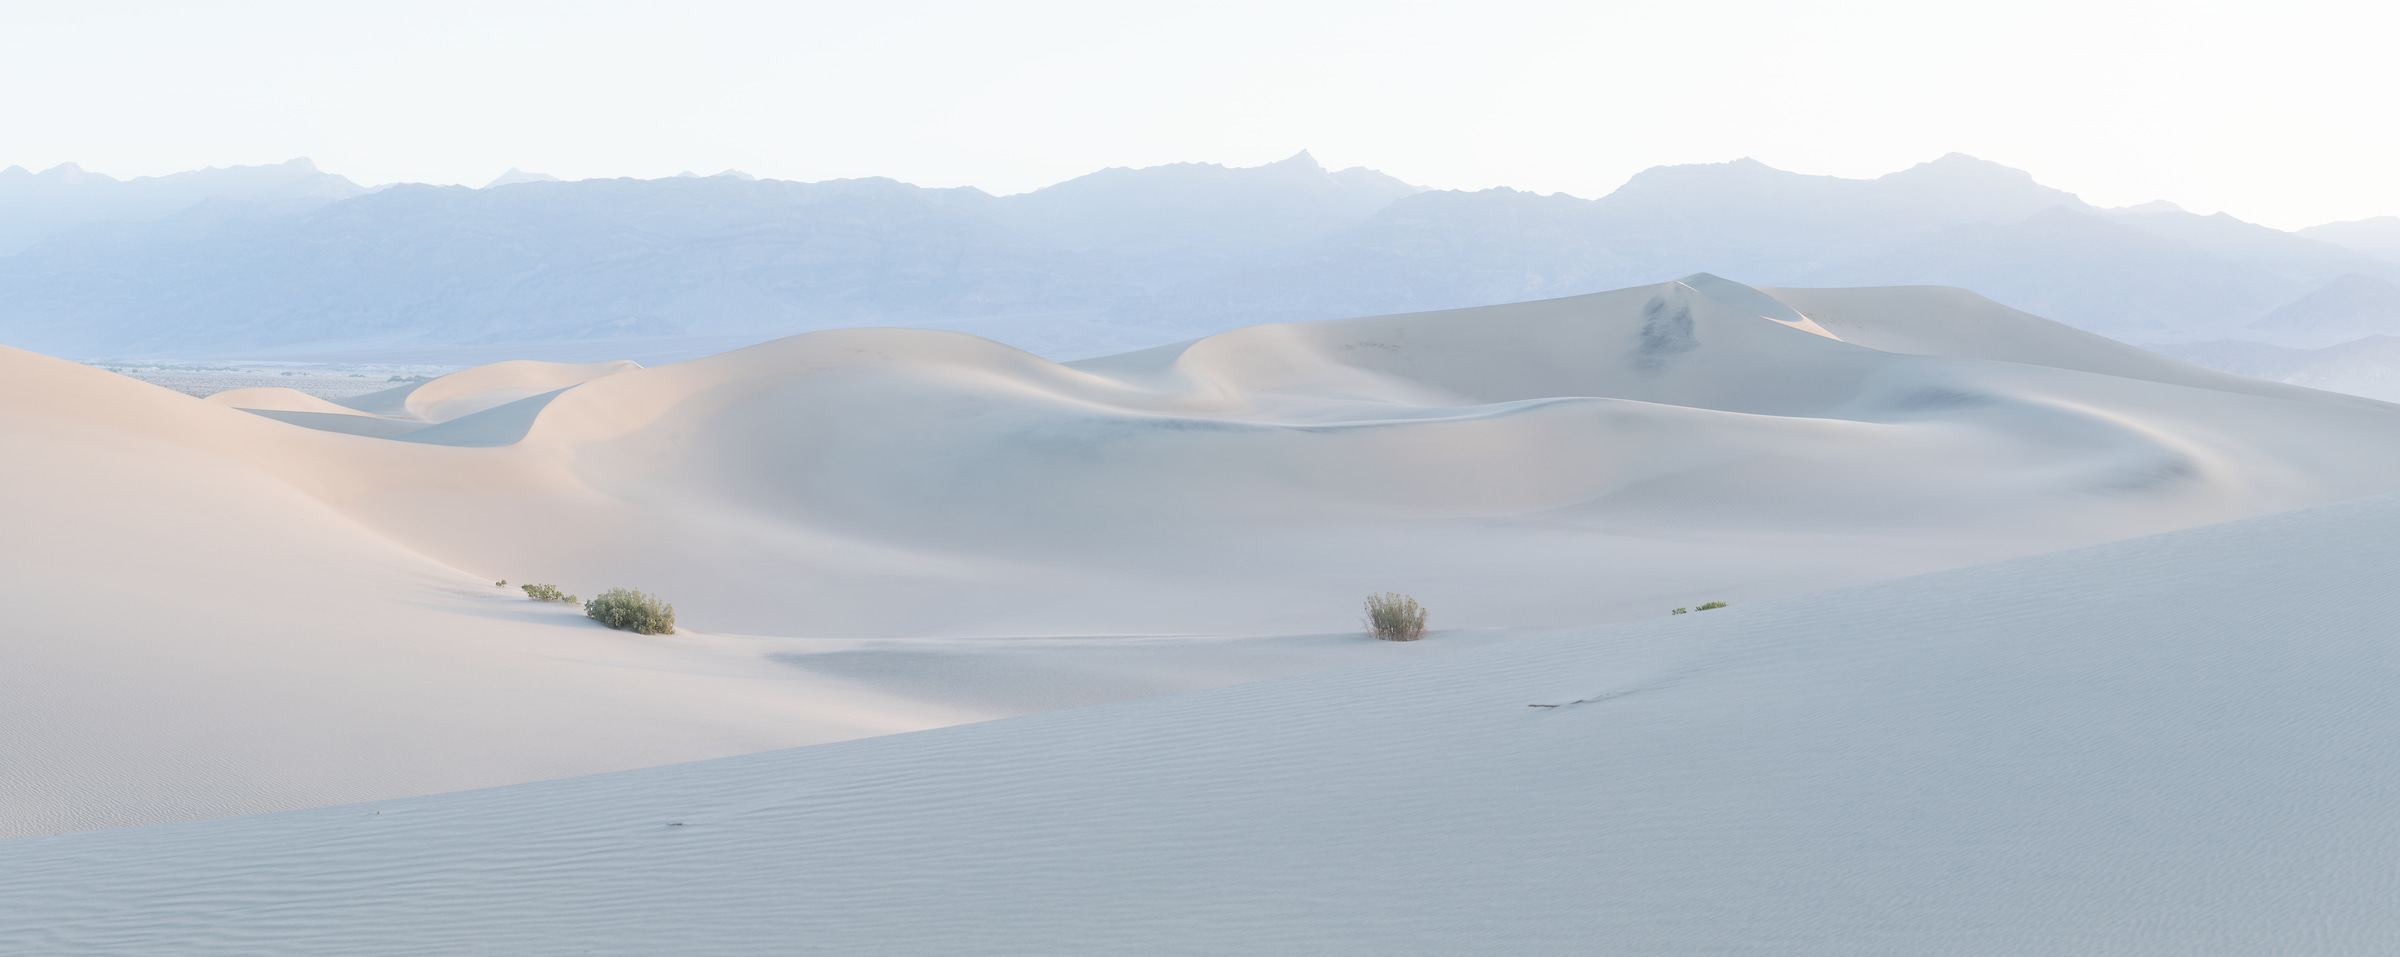 366 megapixels! A very high resolution, large-format VAST photo print of Mesquite Flat Sand Dunes in Death Valley National Park; landscape photograph created by Greg Probst in California